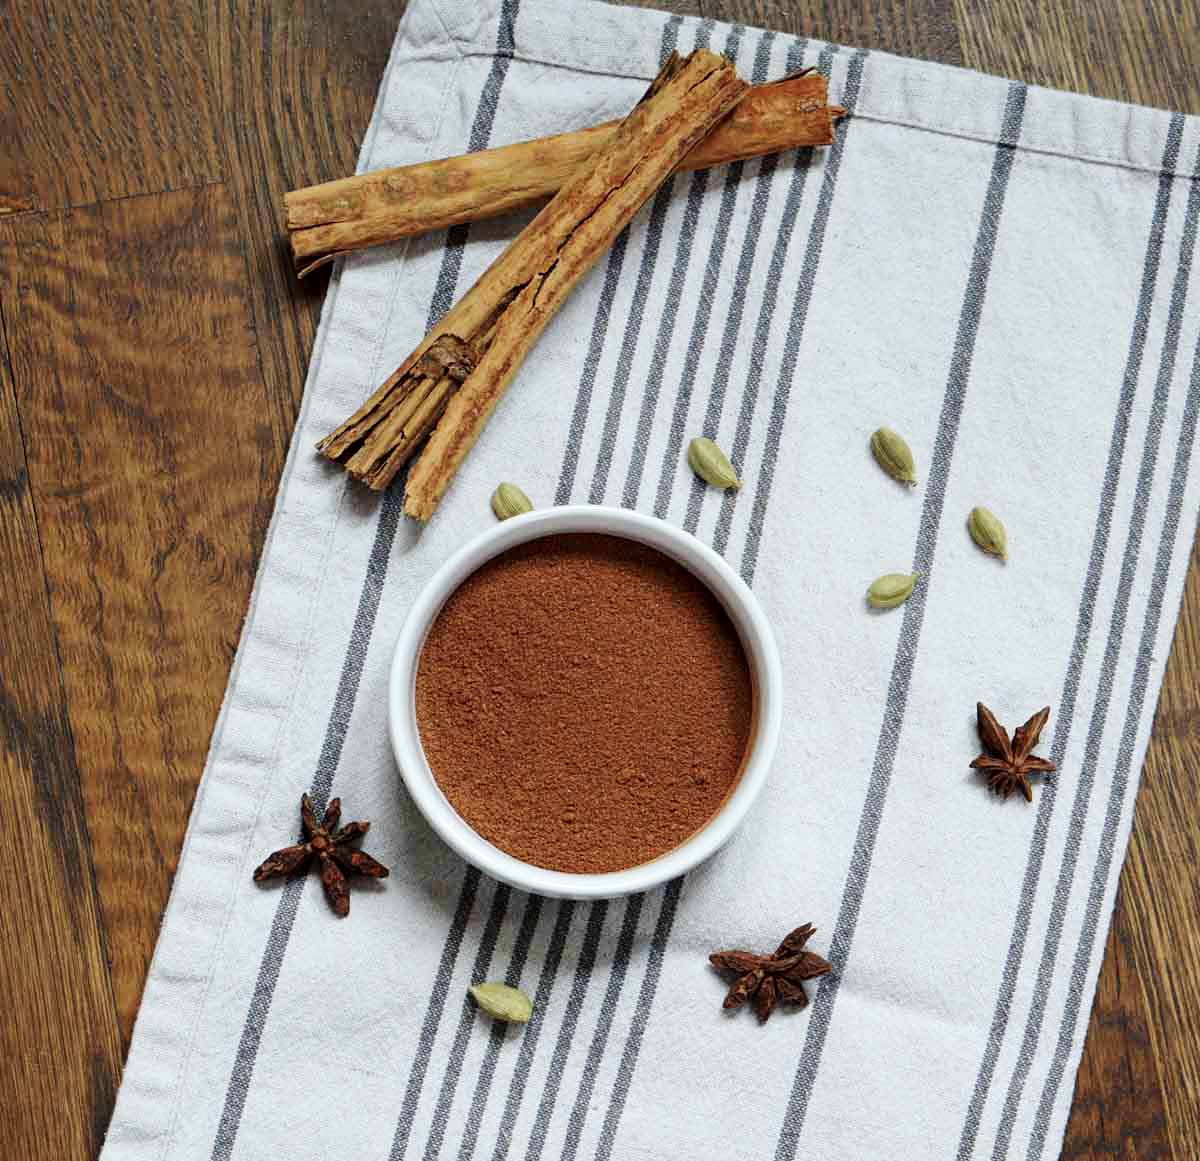 Pumpkin Pie spice mix on table with spices